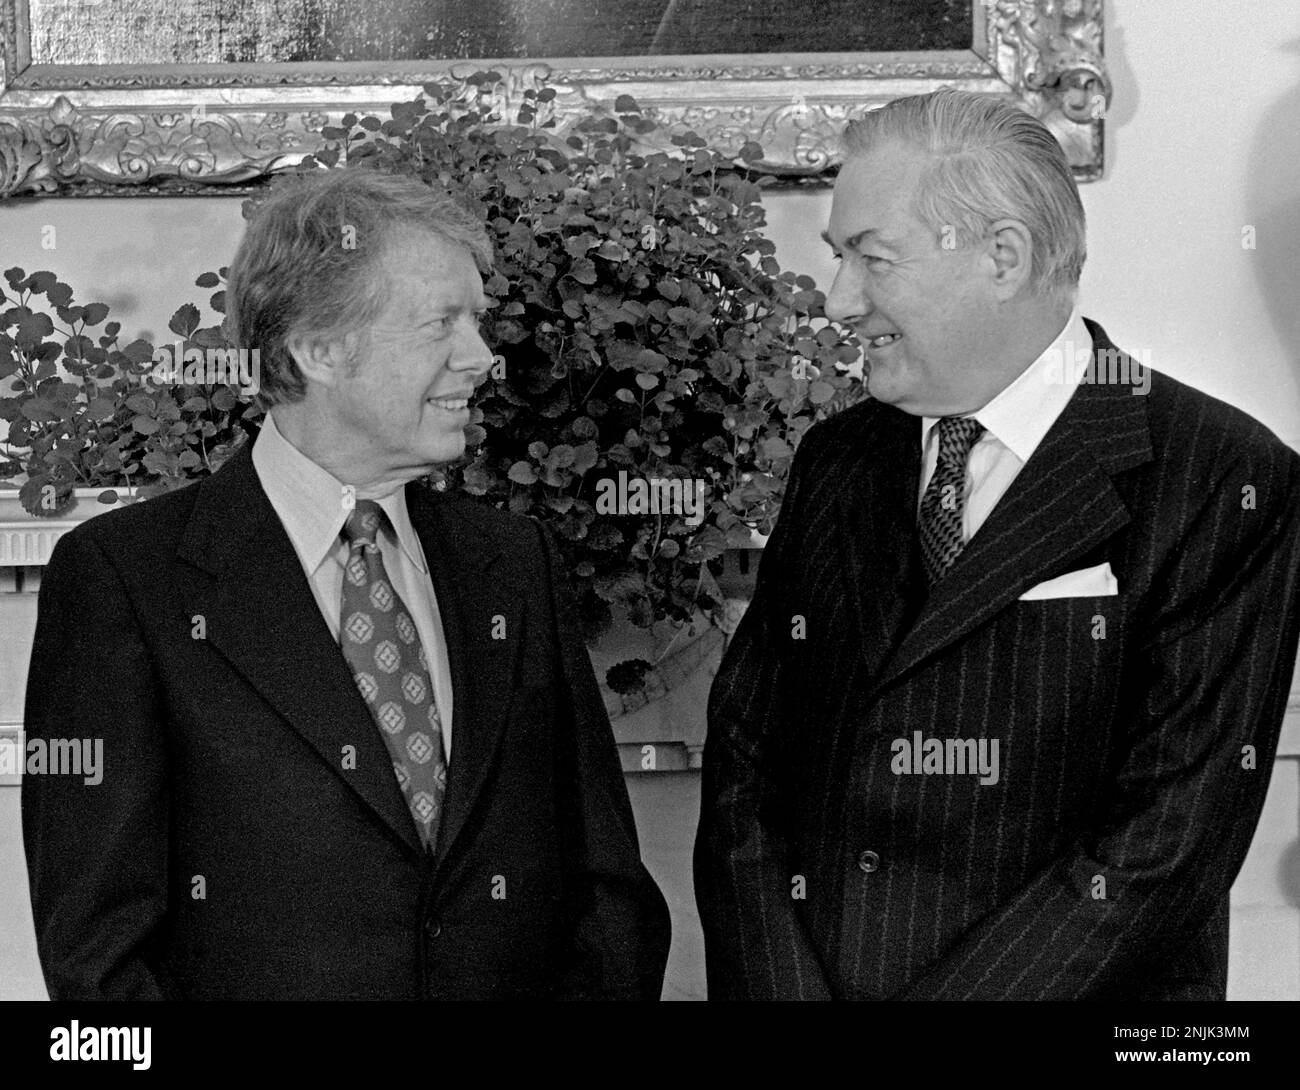 United States President Jimmy Carter, left, and Prime Minister James Callaghan of the United Kingdom of Great Briitain and Northern Ireland, right, as they meet in the Oval Office of the White House in Washington, DC following the conclusion of the Official Arrival ceremony on March 10, 1977Credit: Benjamin E. 'Gene' Forte/CNP/Sipa USA Credit: Sipa USA/Alamy Live News Stock Photo